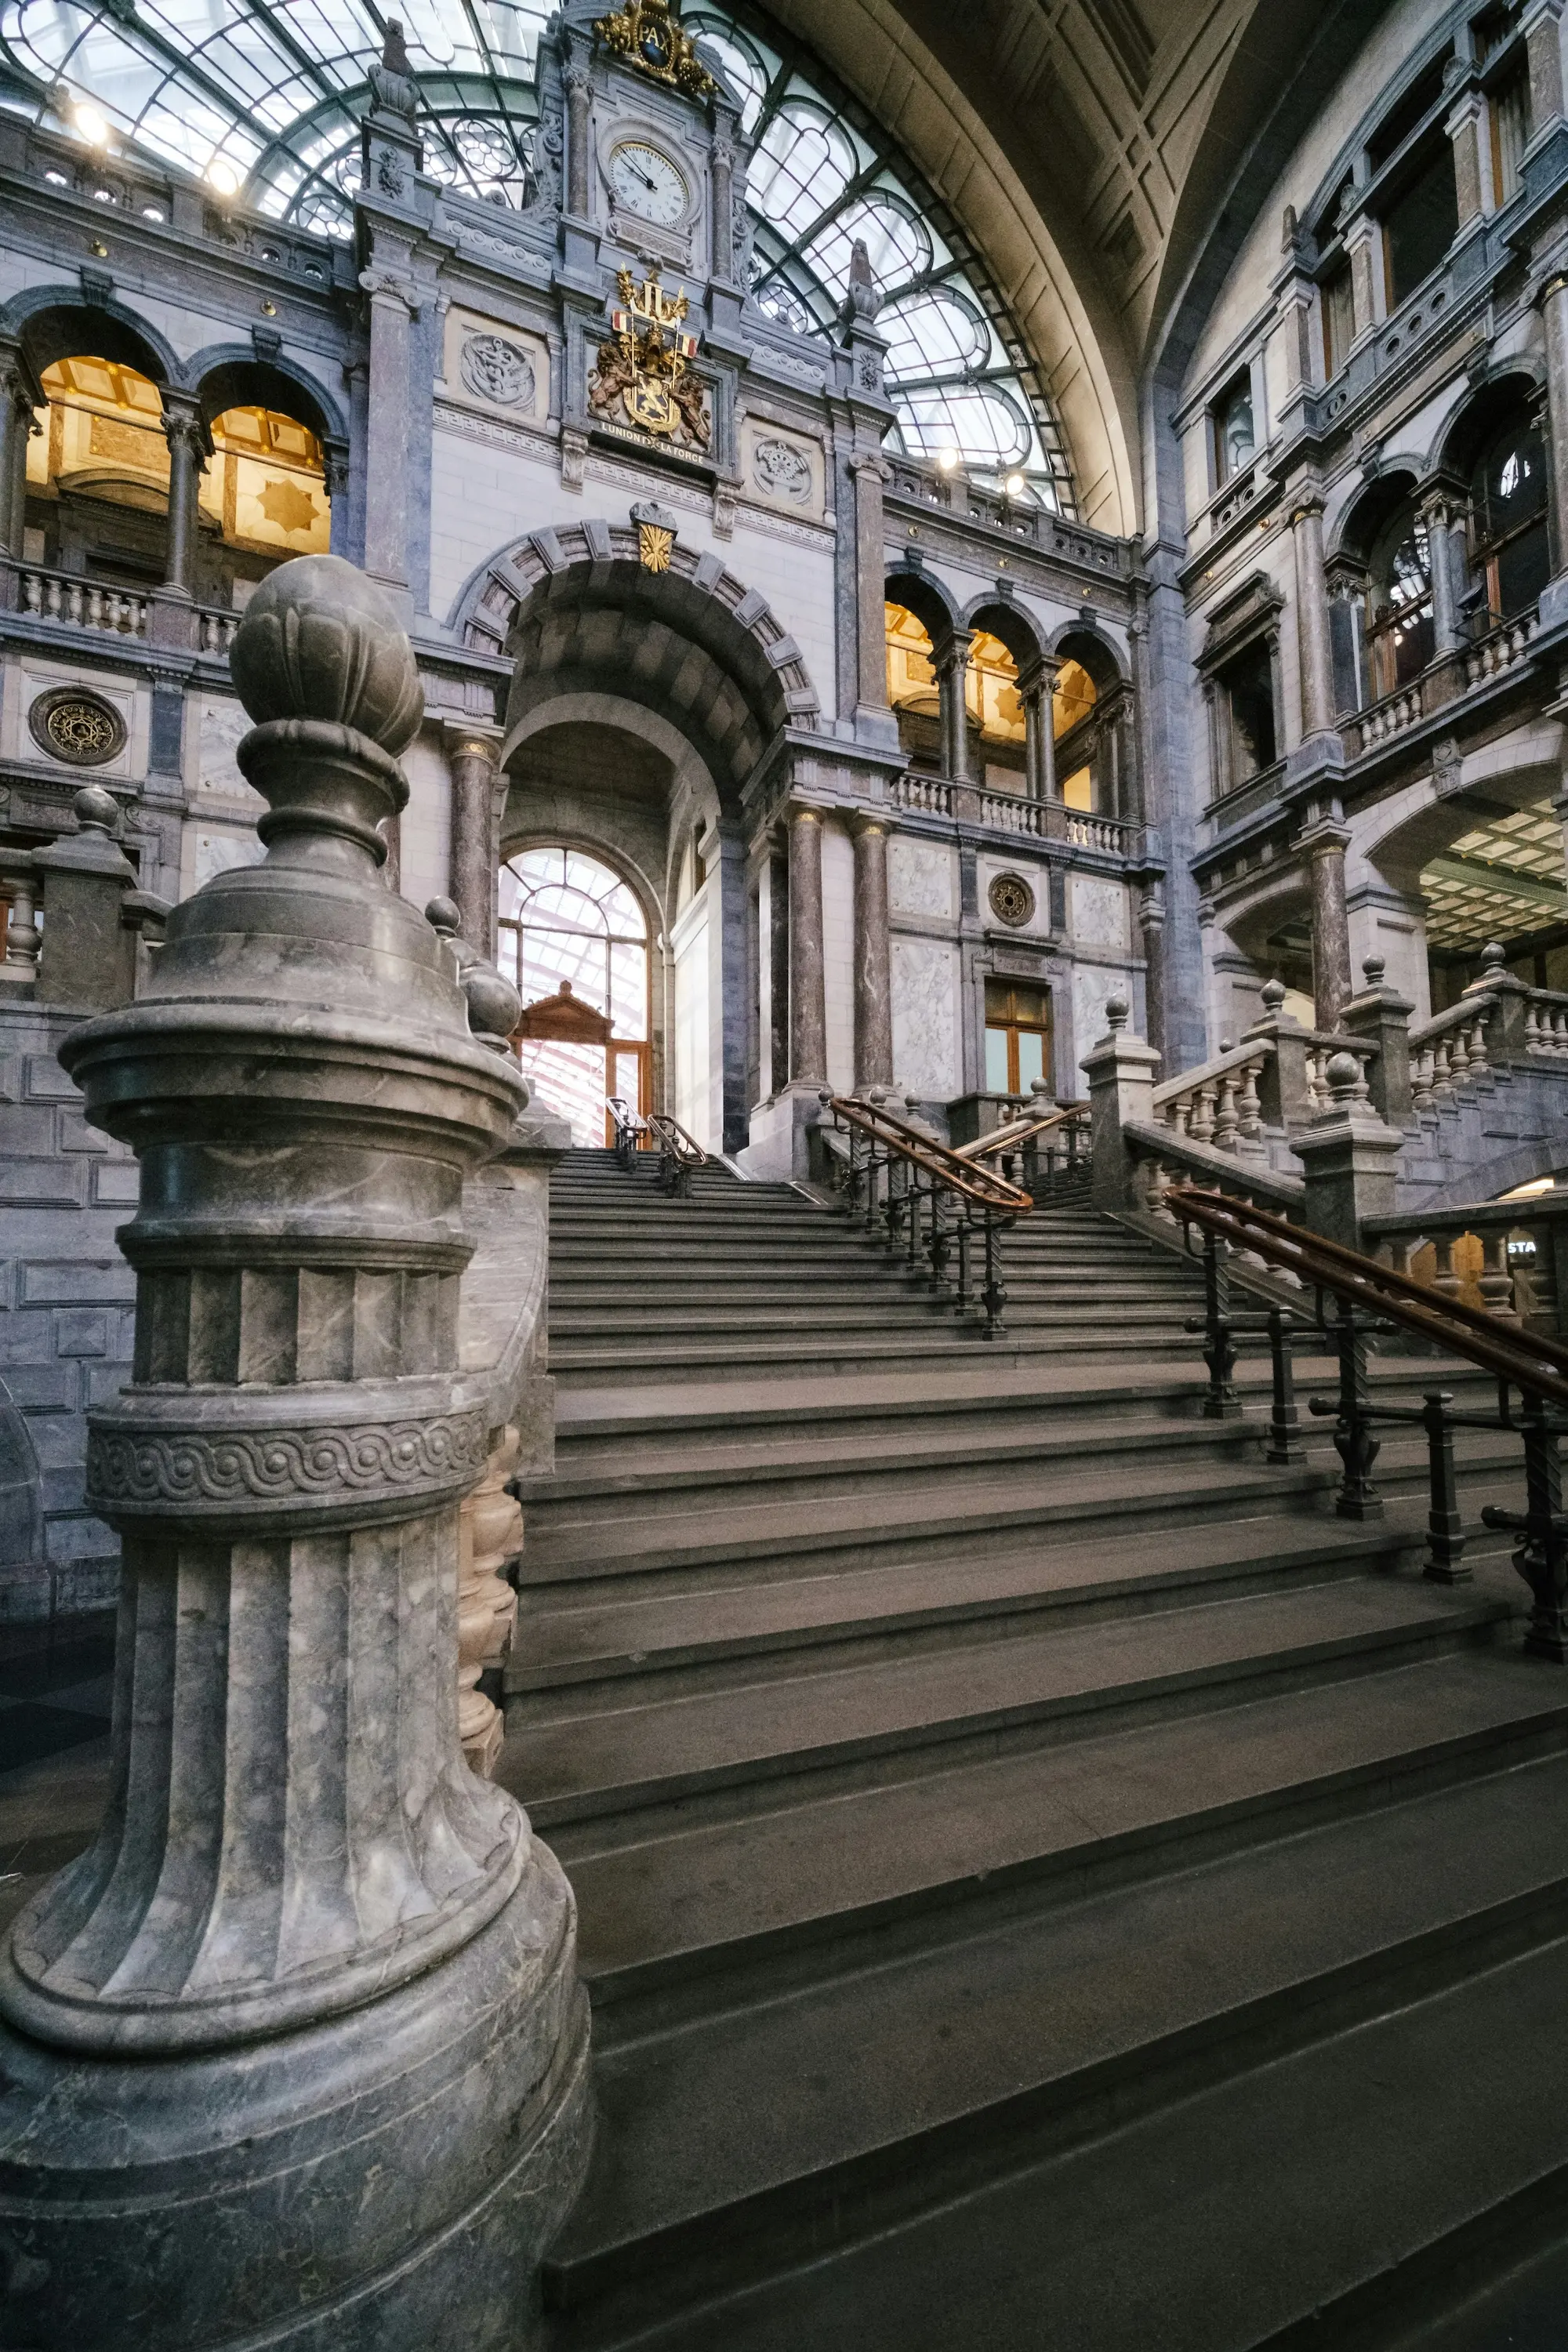 Antwerp by Night: Guided Tour Starting from Antwerp Central Station, Exploring City's Architectural Marvels